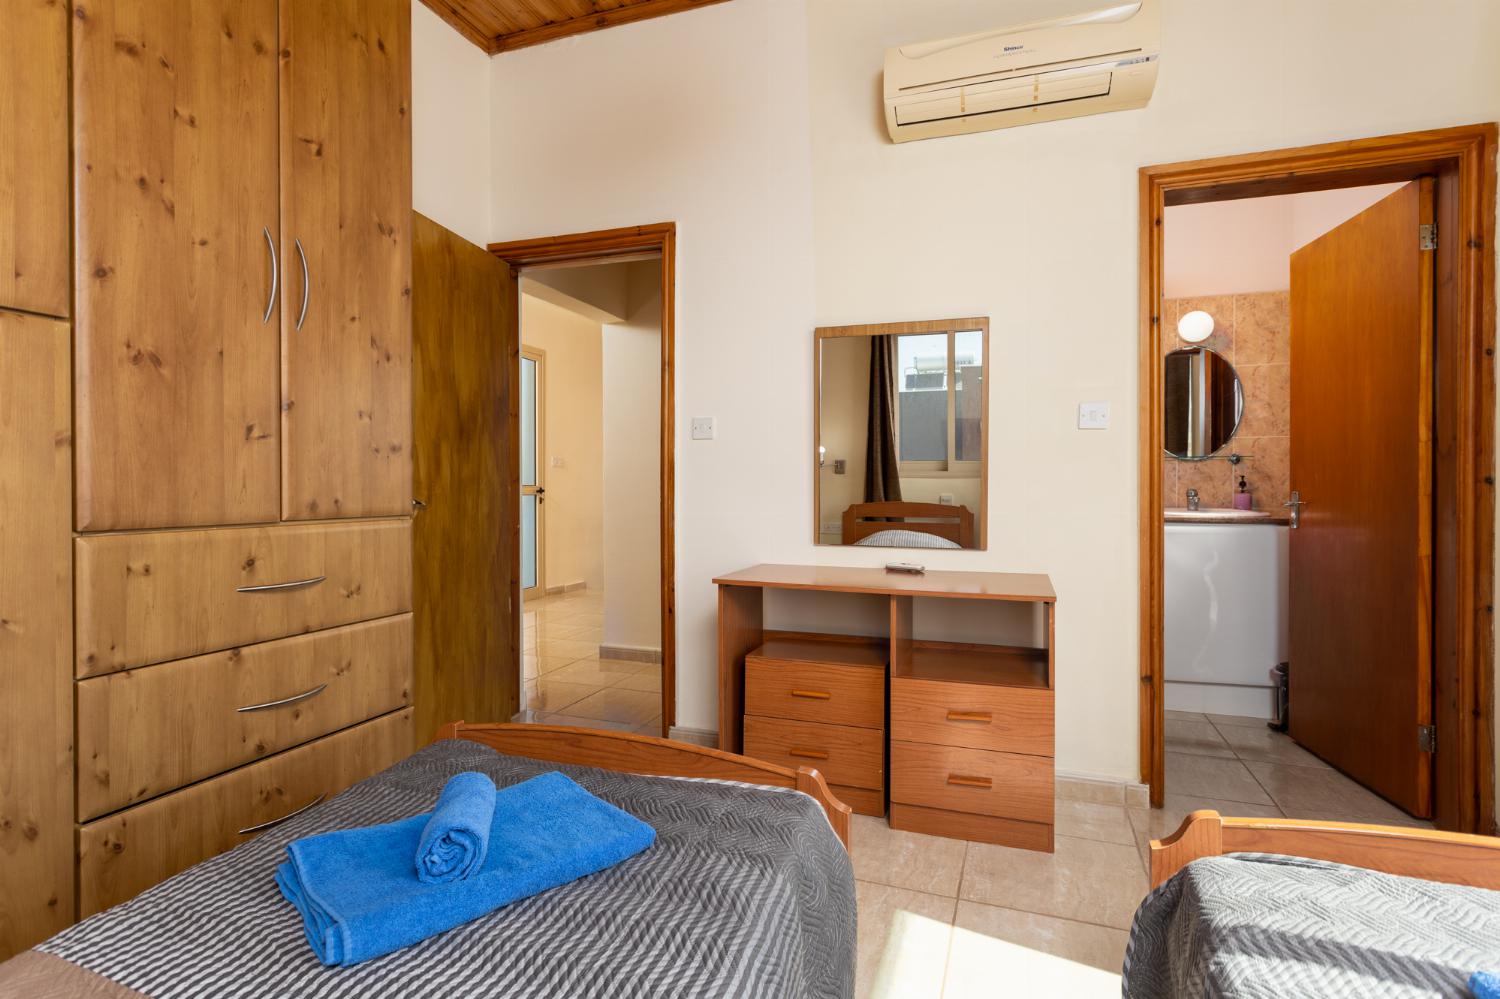 Twin bedroom on first floor with en suite bathroom, A/C, sea views, and balcony access